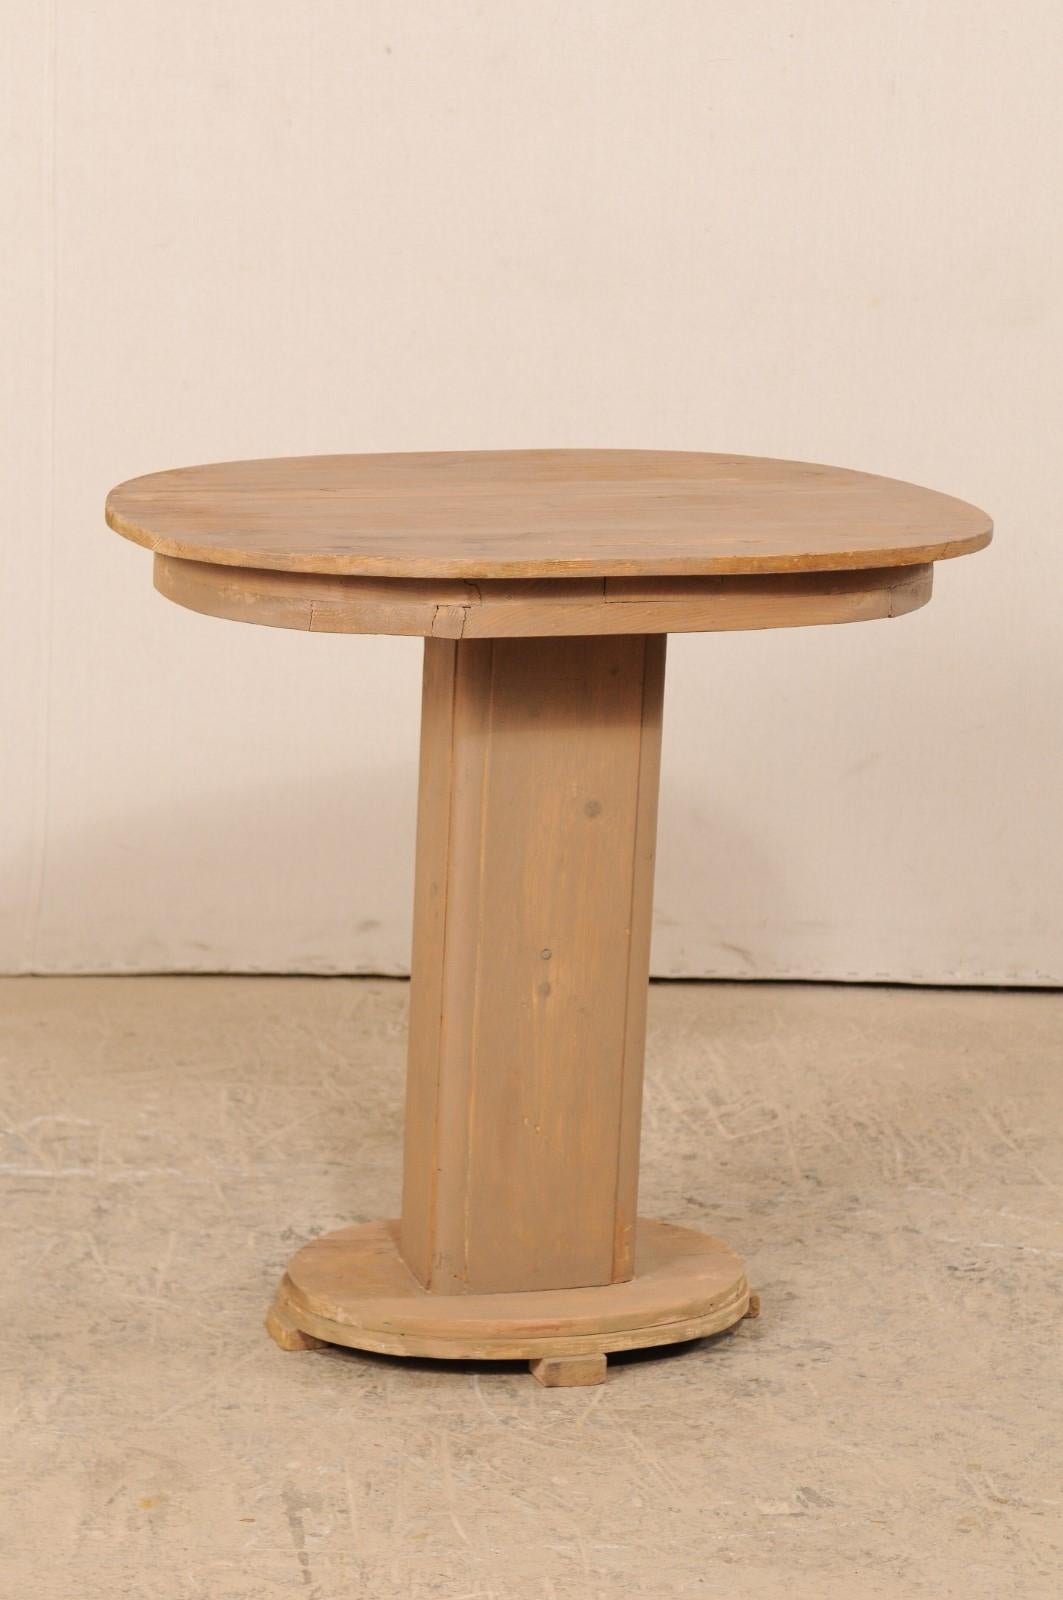 Carved French Mid-20th Century Painted Wood Oval Top Pedestal Table For Sale